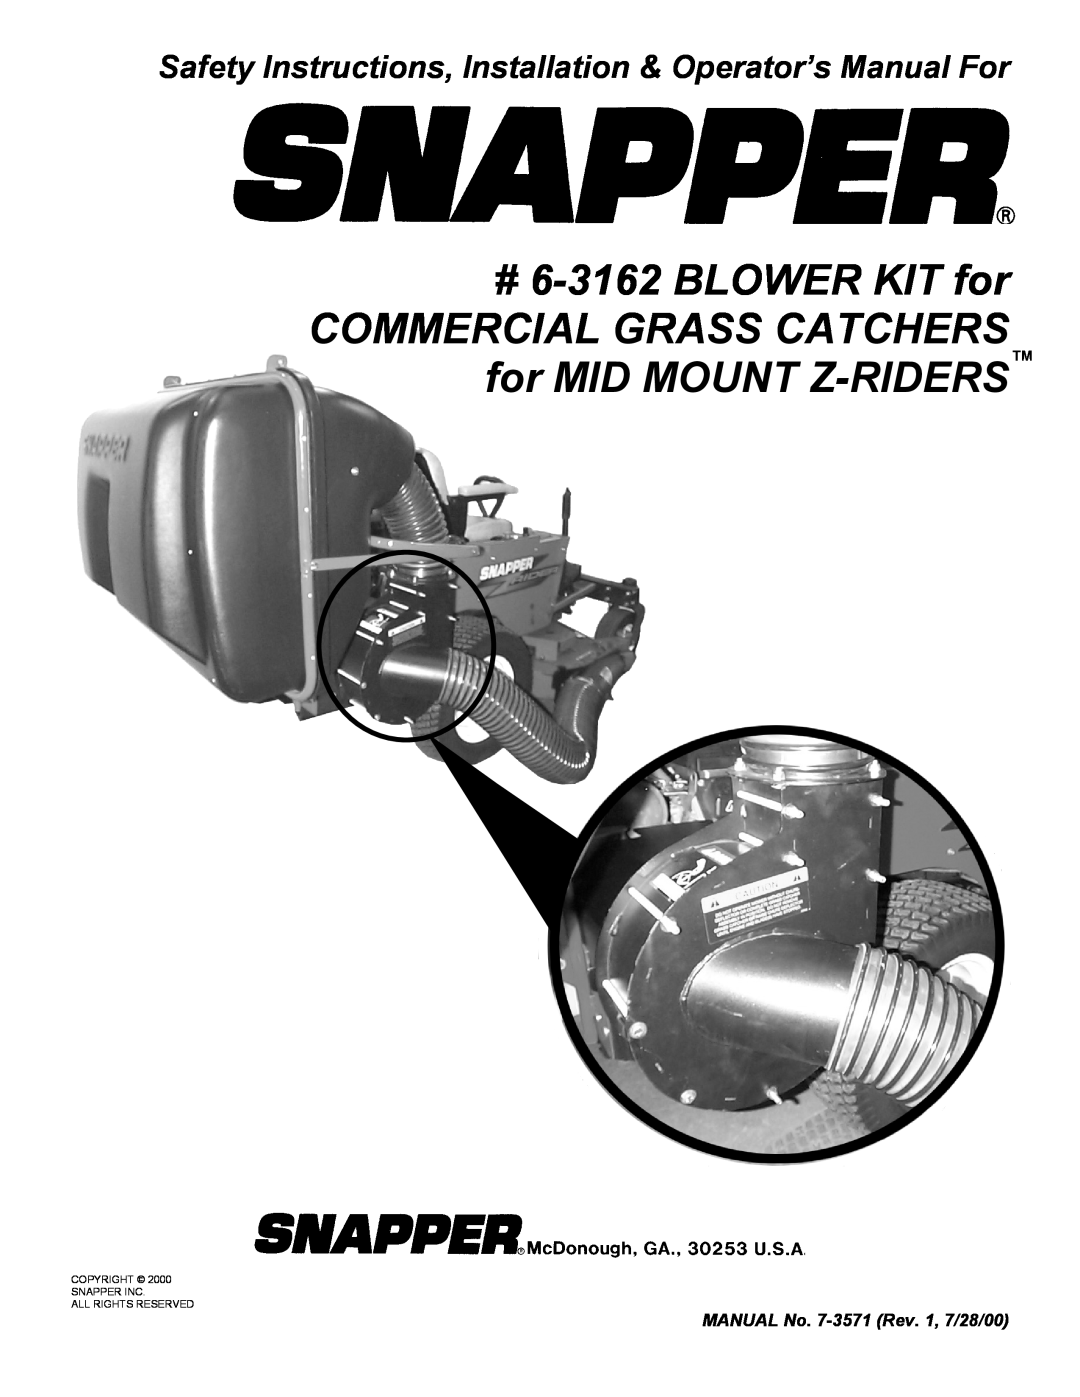 Snapper manual #6-3162BLOWER KIT for, MANUAL No. 7-3571Rev. 1, 7/28/00, Copyright Snapper Inc All Rights Reserved 